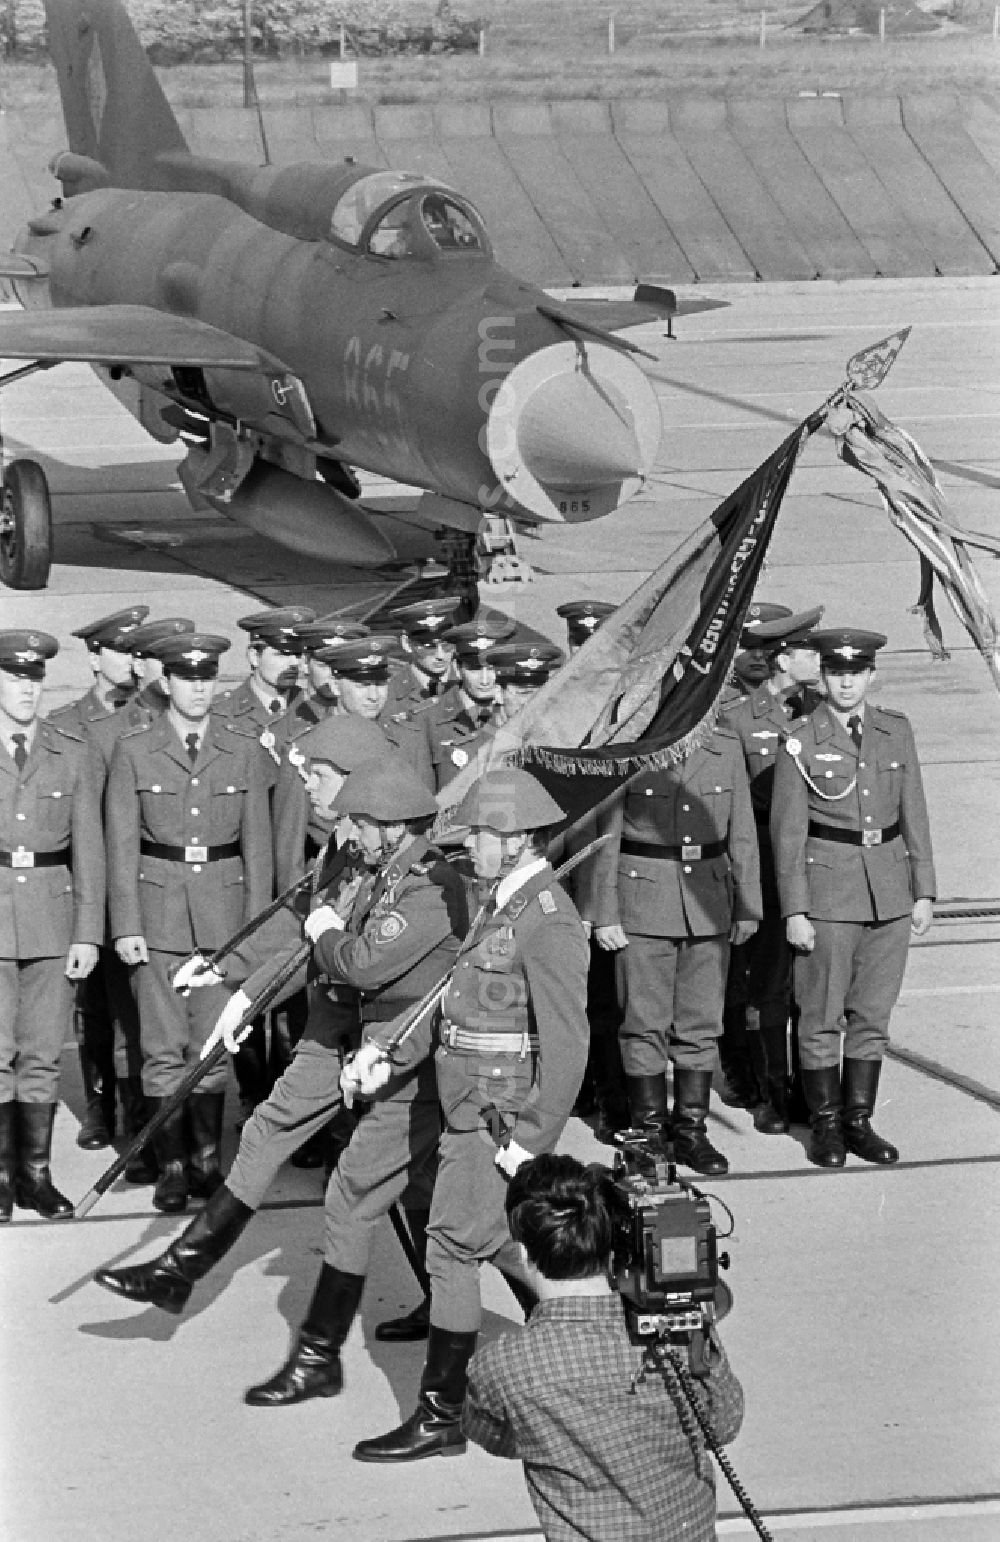 GDR image archive: Jänschwalde - Media-effective passage of the honorary formation of the flag command of troops from the fighter squadron Wilhelm Pieck of the air force at the pre-launch line of the stationed MiG-21 PFM weapon system as part of a disarmament action at the Drewitz airfield of the National People's Army NVA office in Jaenschwalde in the state of Brandenburg on the territory of the former GDR, German Democratic Republic